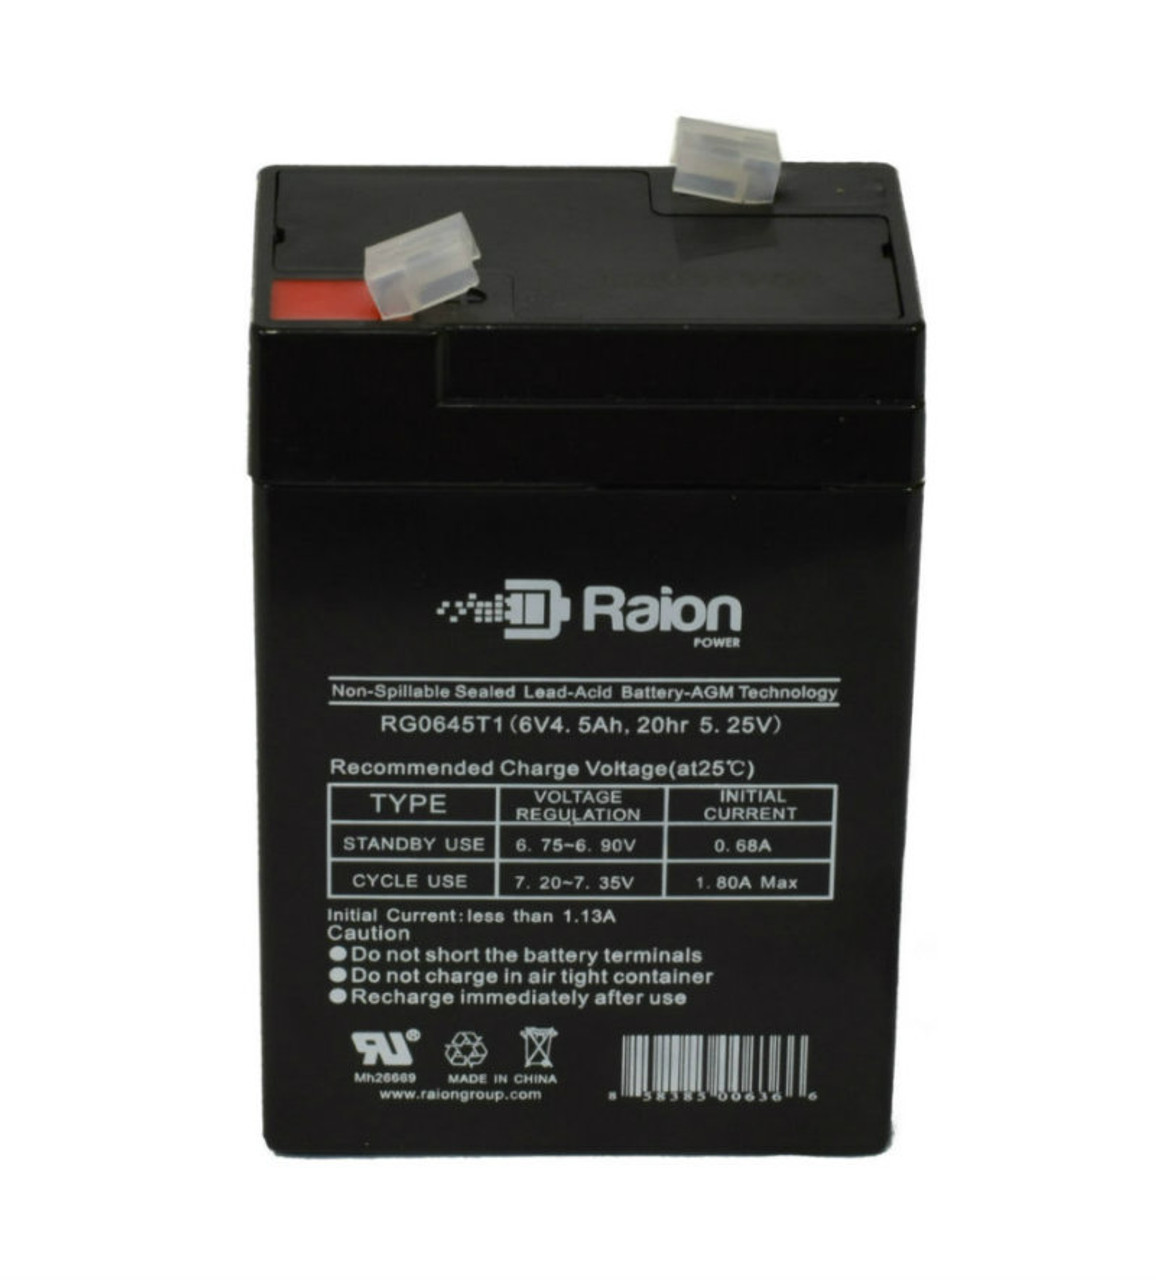 Raion Power RG0645T1 Replacement Battery Cartridge for Dual-Lite ICL1